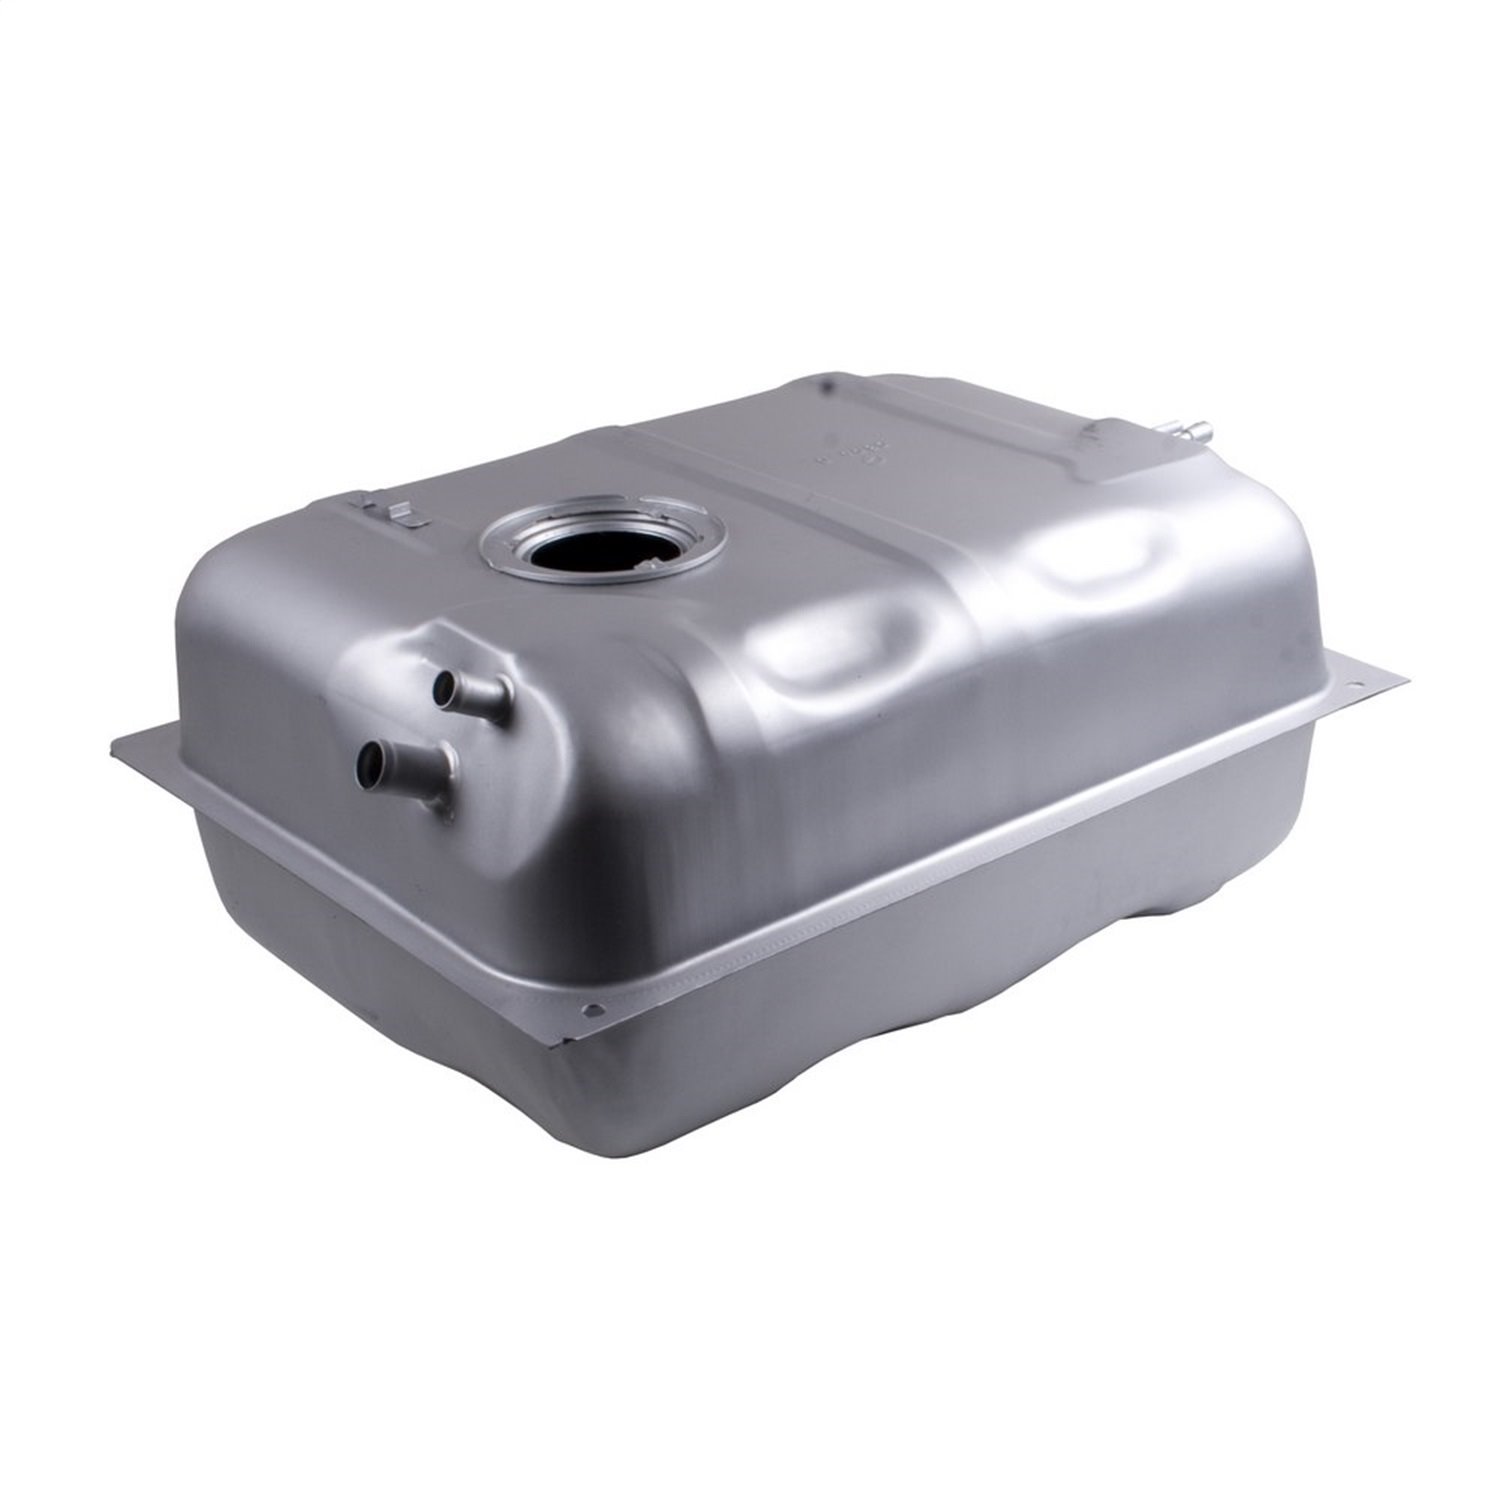 15 Gal Gas/Fuel Tank 4.2L 1987-1990 Jeep CJ and Wrangler By Omix-ADA